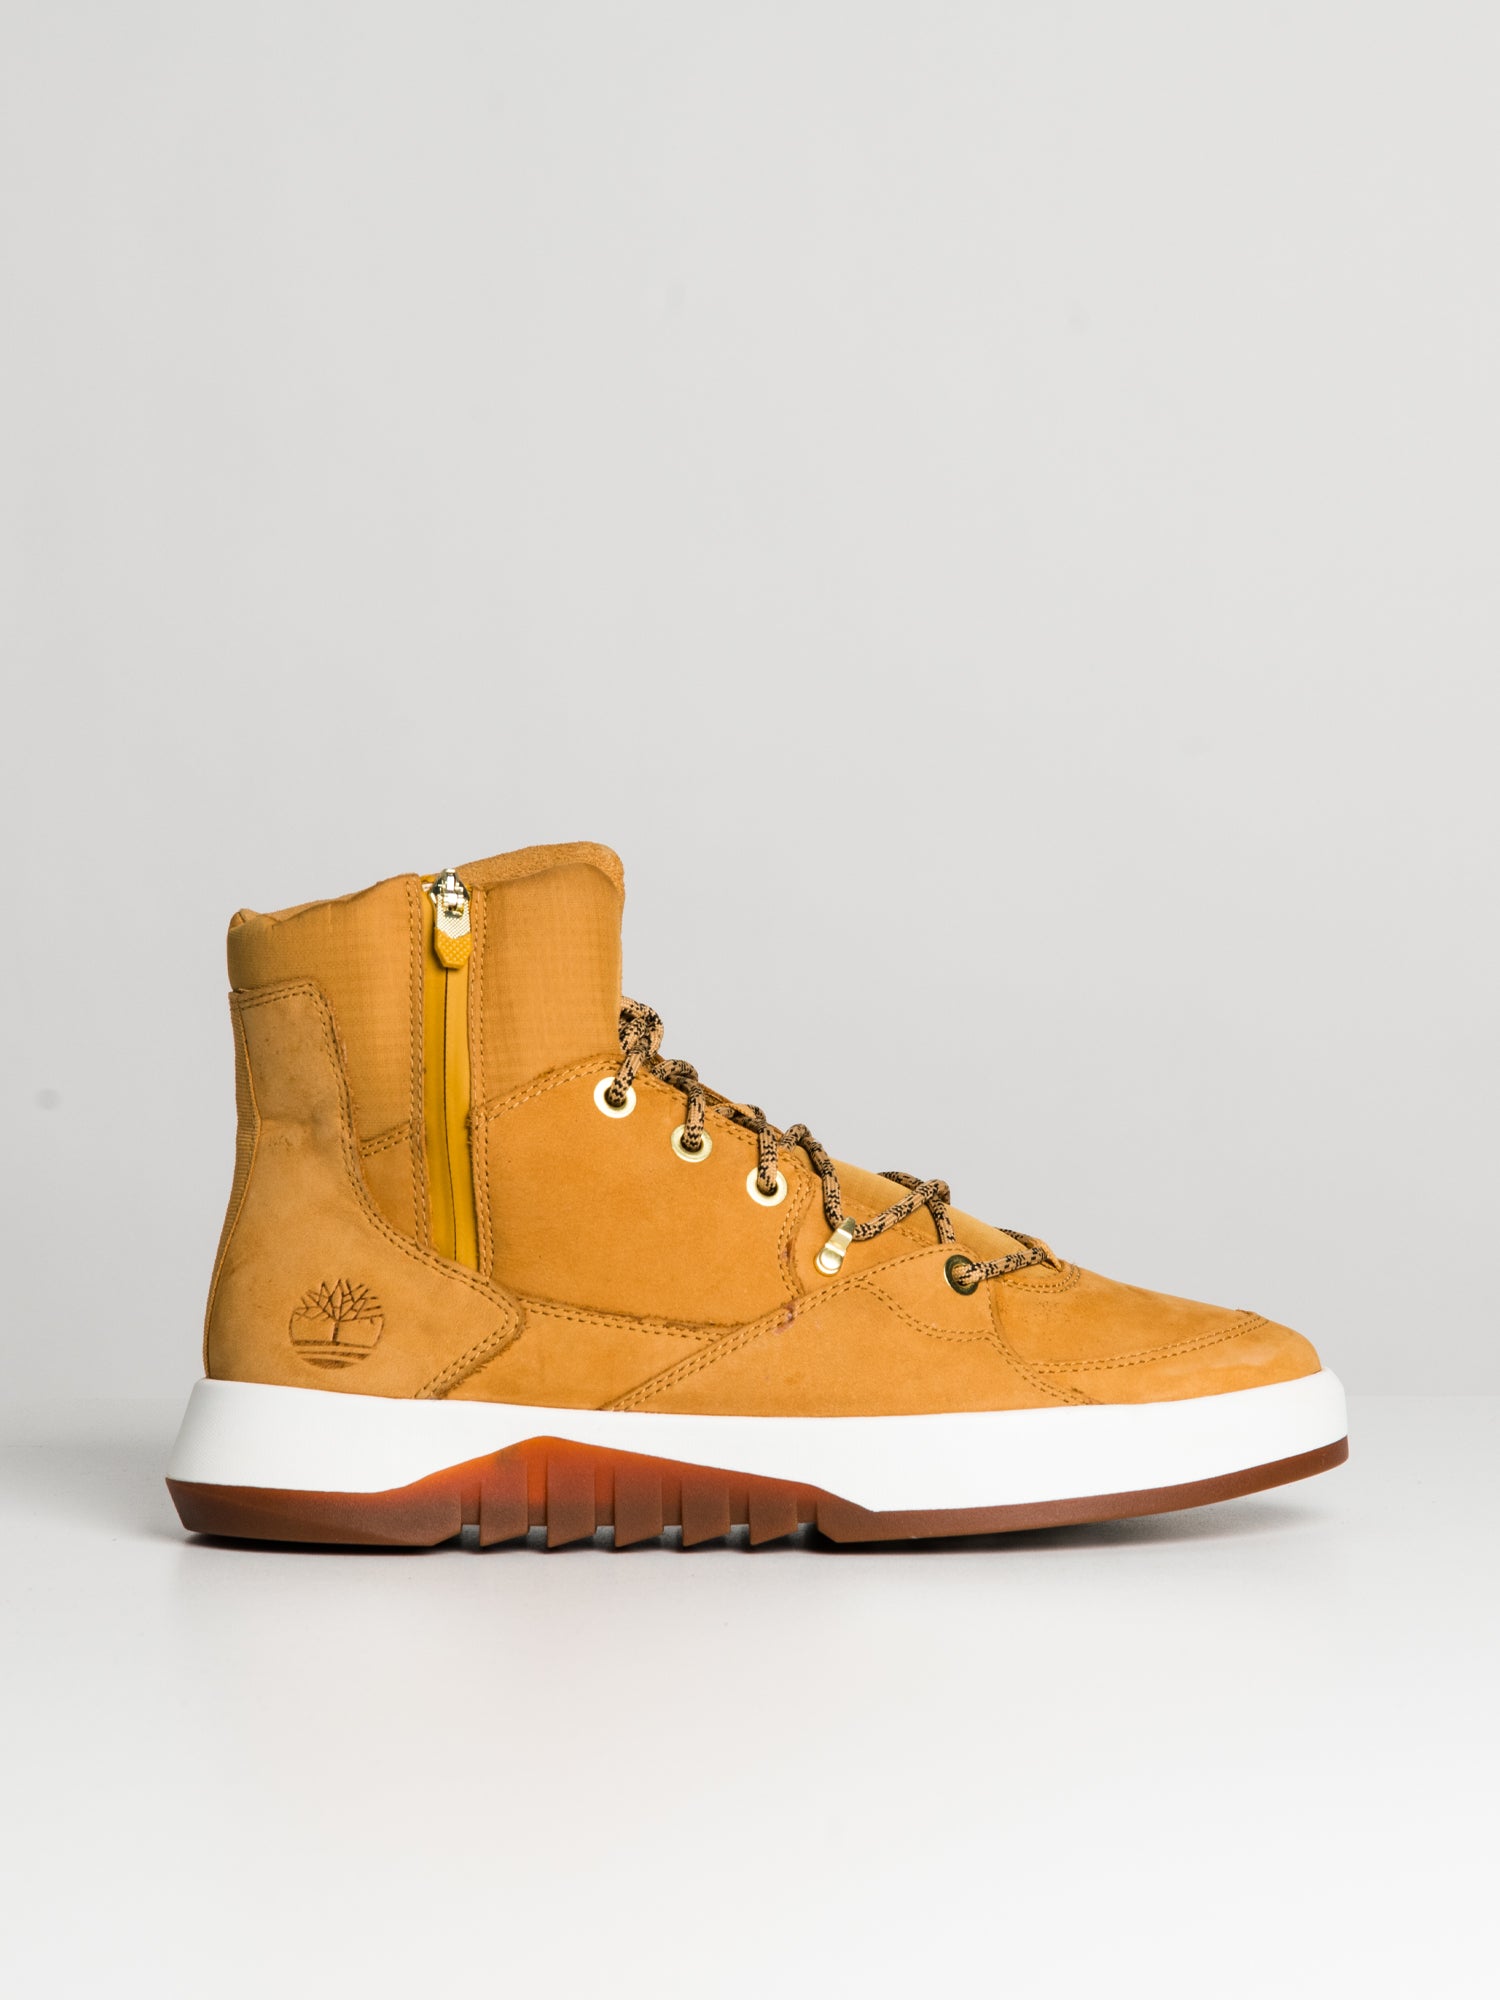 Timberland Drops New 'Venture Out' Line With Waterproof Hiking Boots –  Footwear News